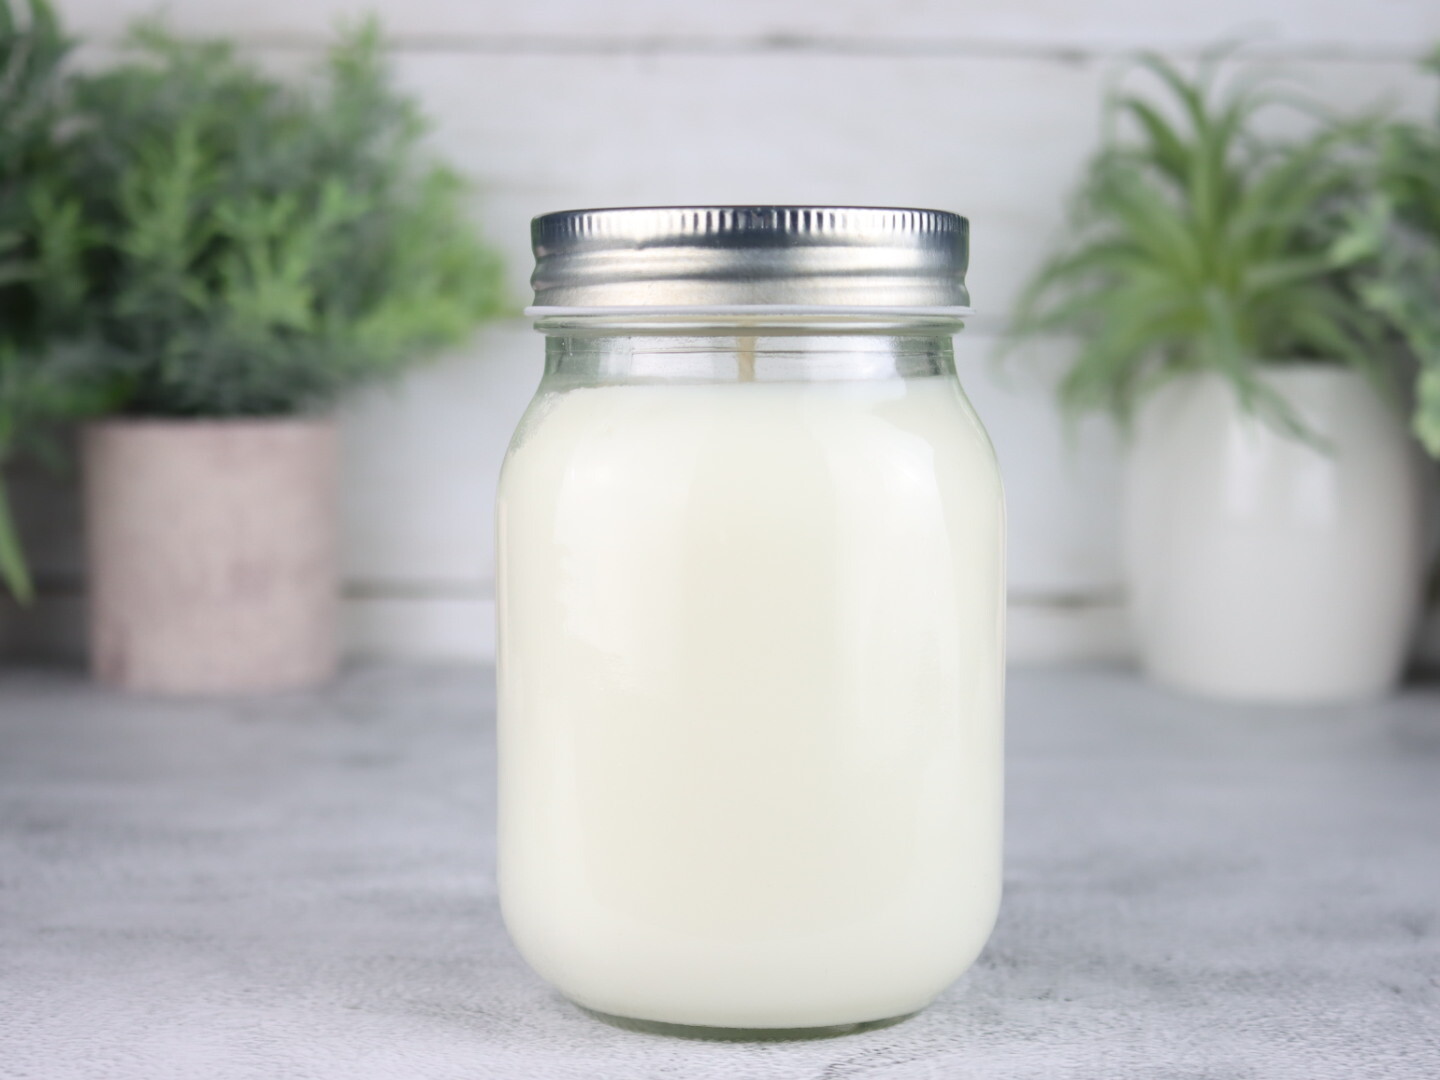 16 oz Aromatherapy Soy Wax Glass Jar Candle with Essential Oils